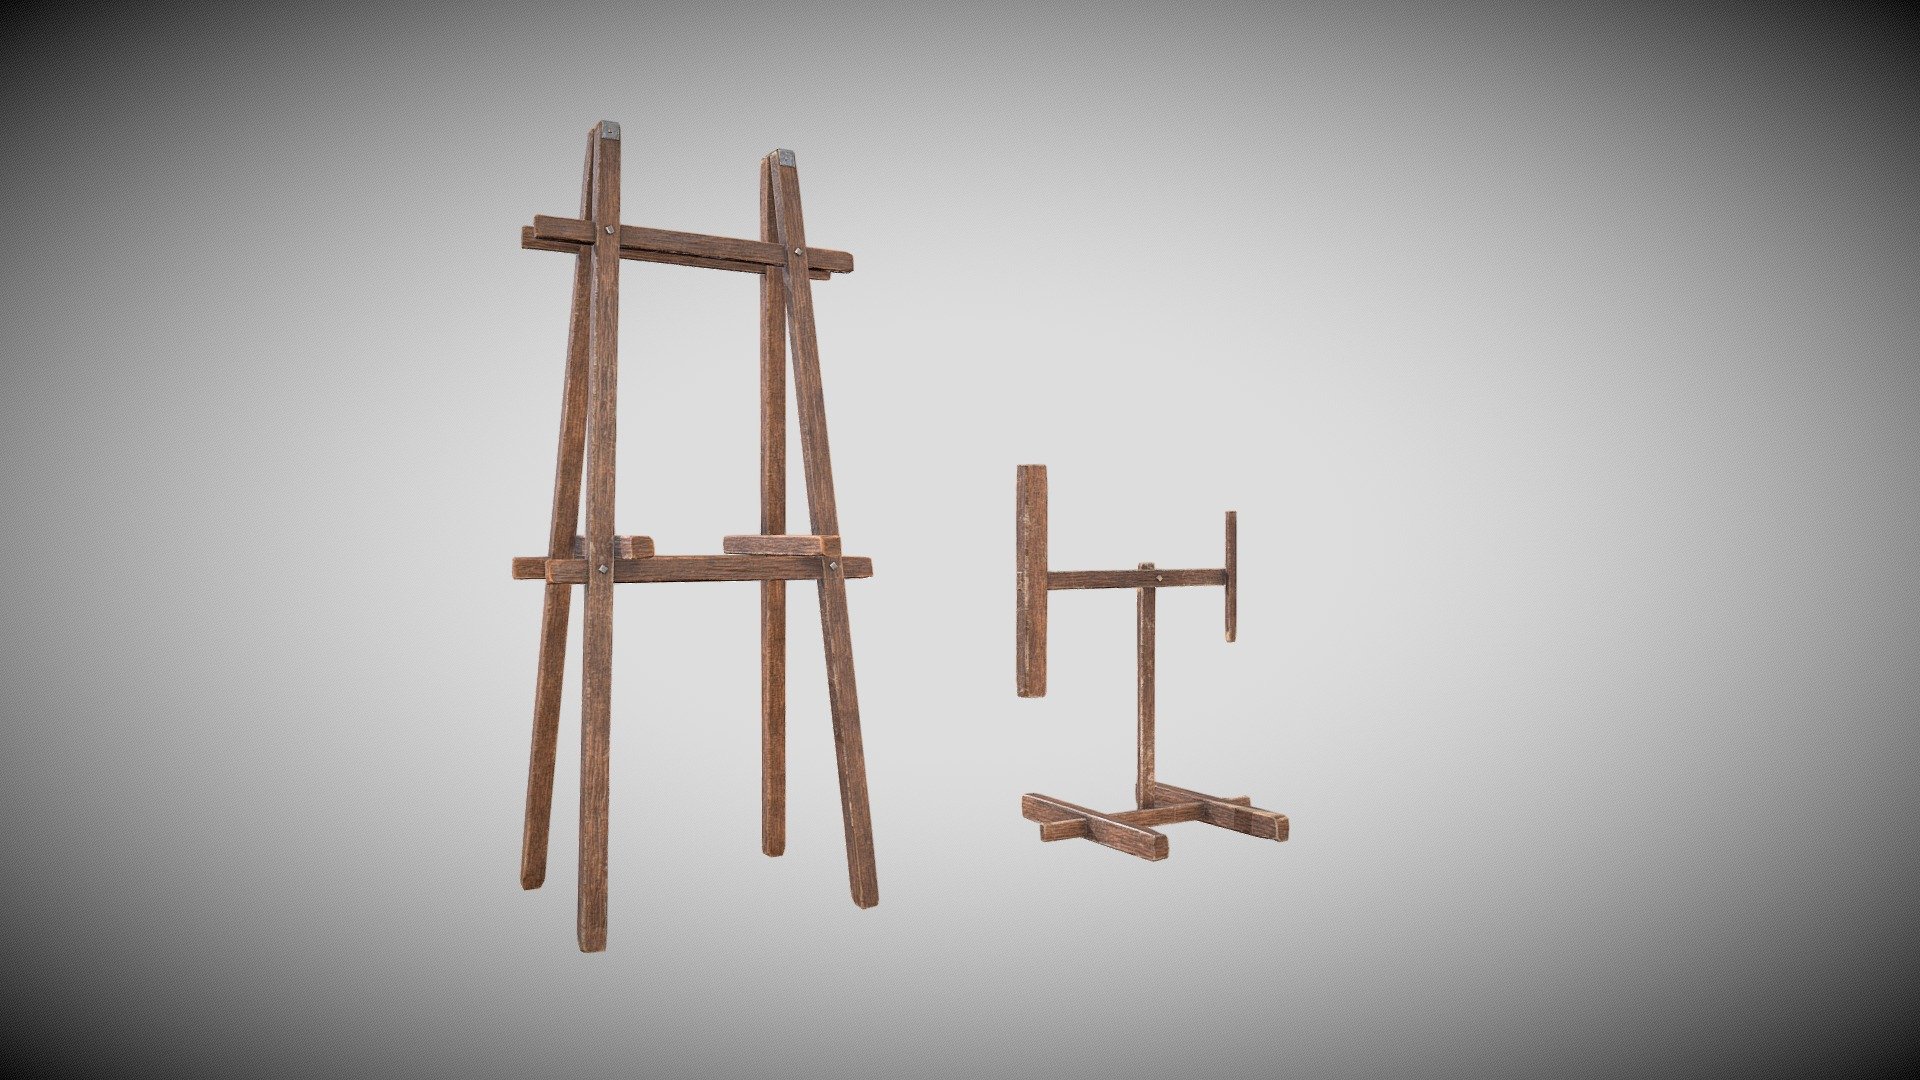 These models were used in the Archer’s Paradox game, a final project for a game design program in Vancouver Film School. There is a static support and a swinging support 3d model